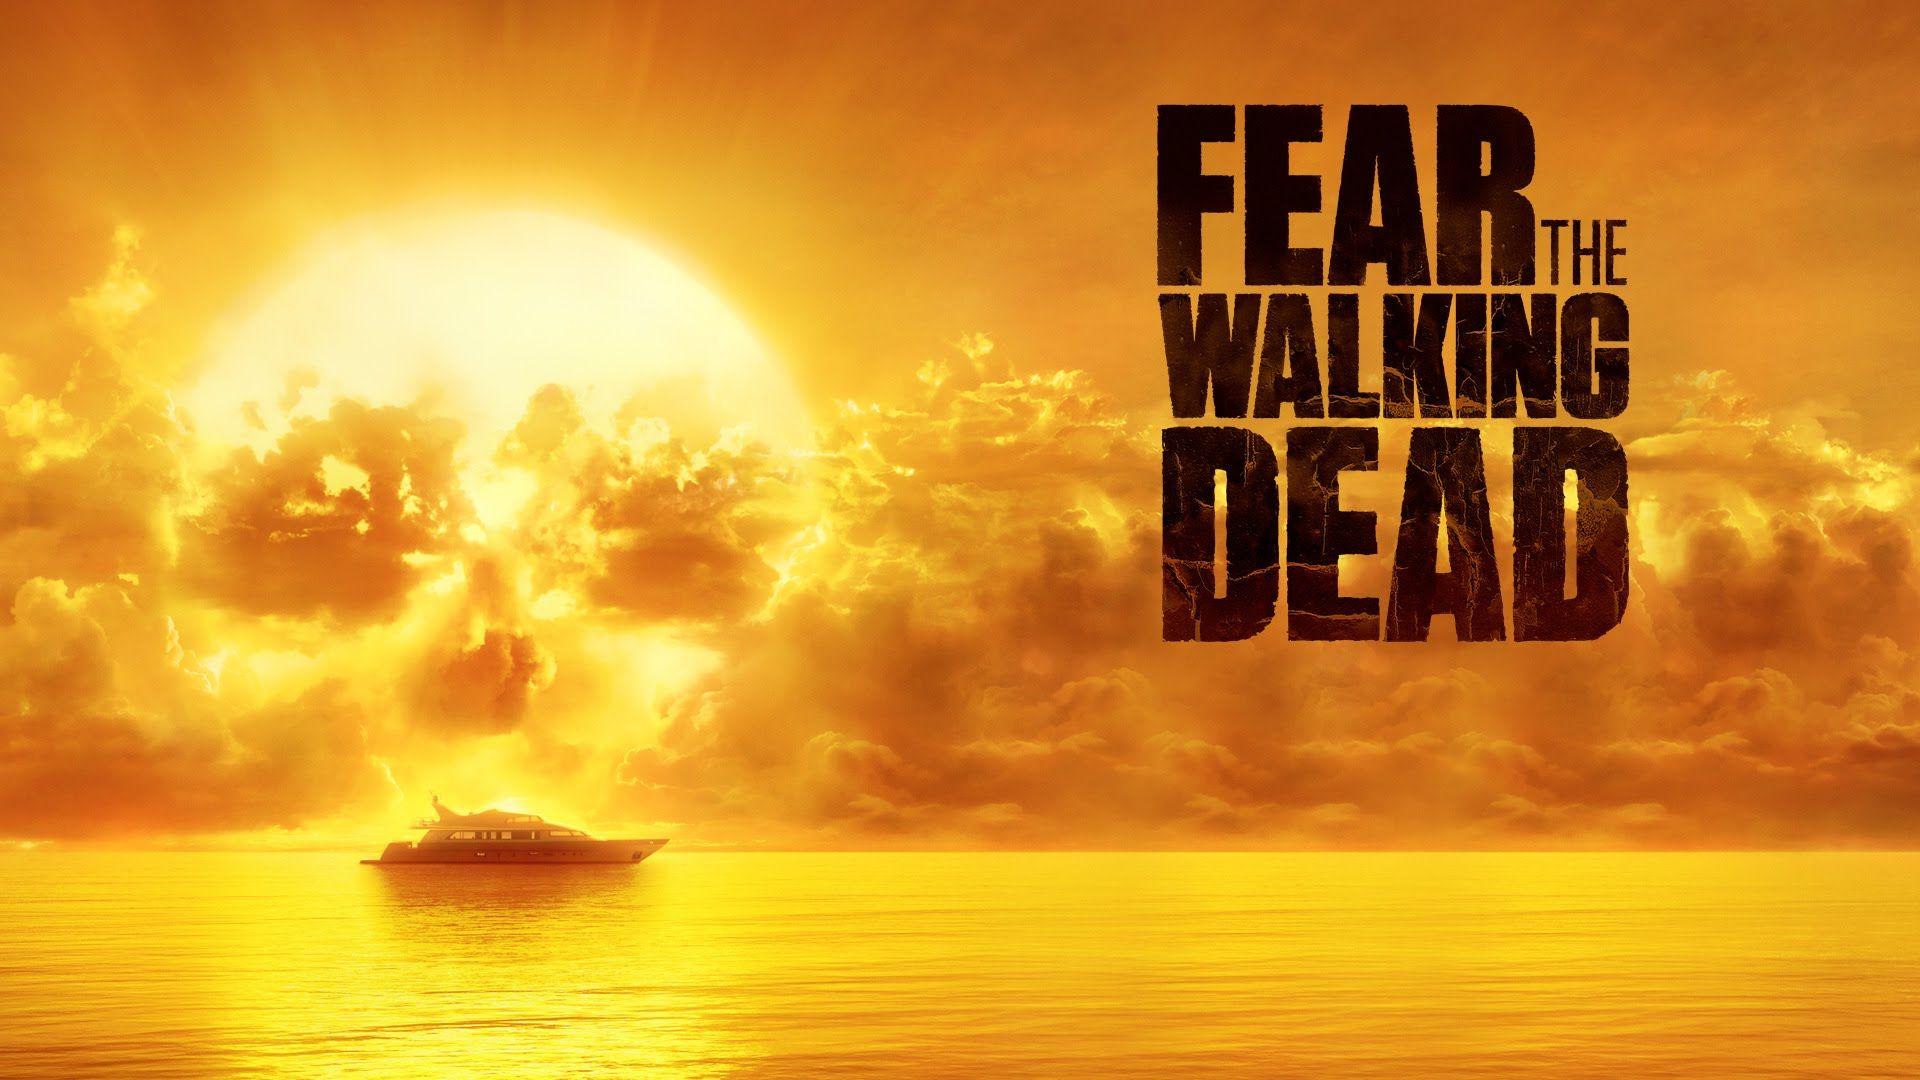 Fear the Walking Dead Wallpaper and Background Image